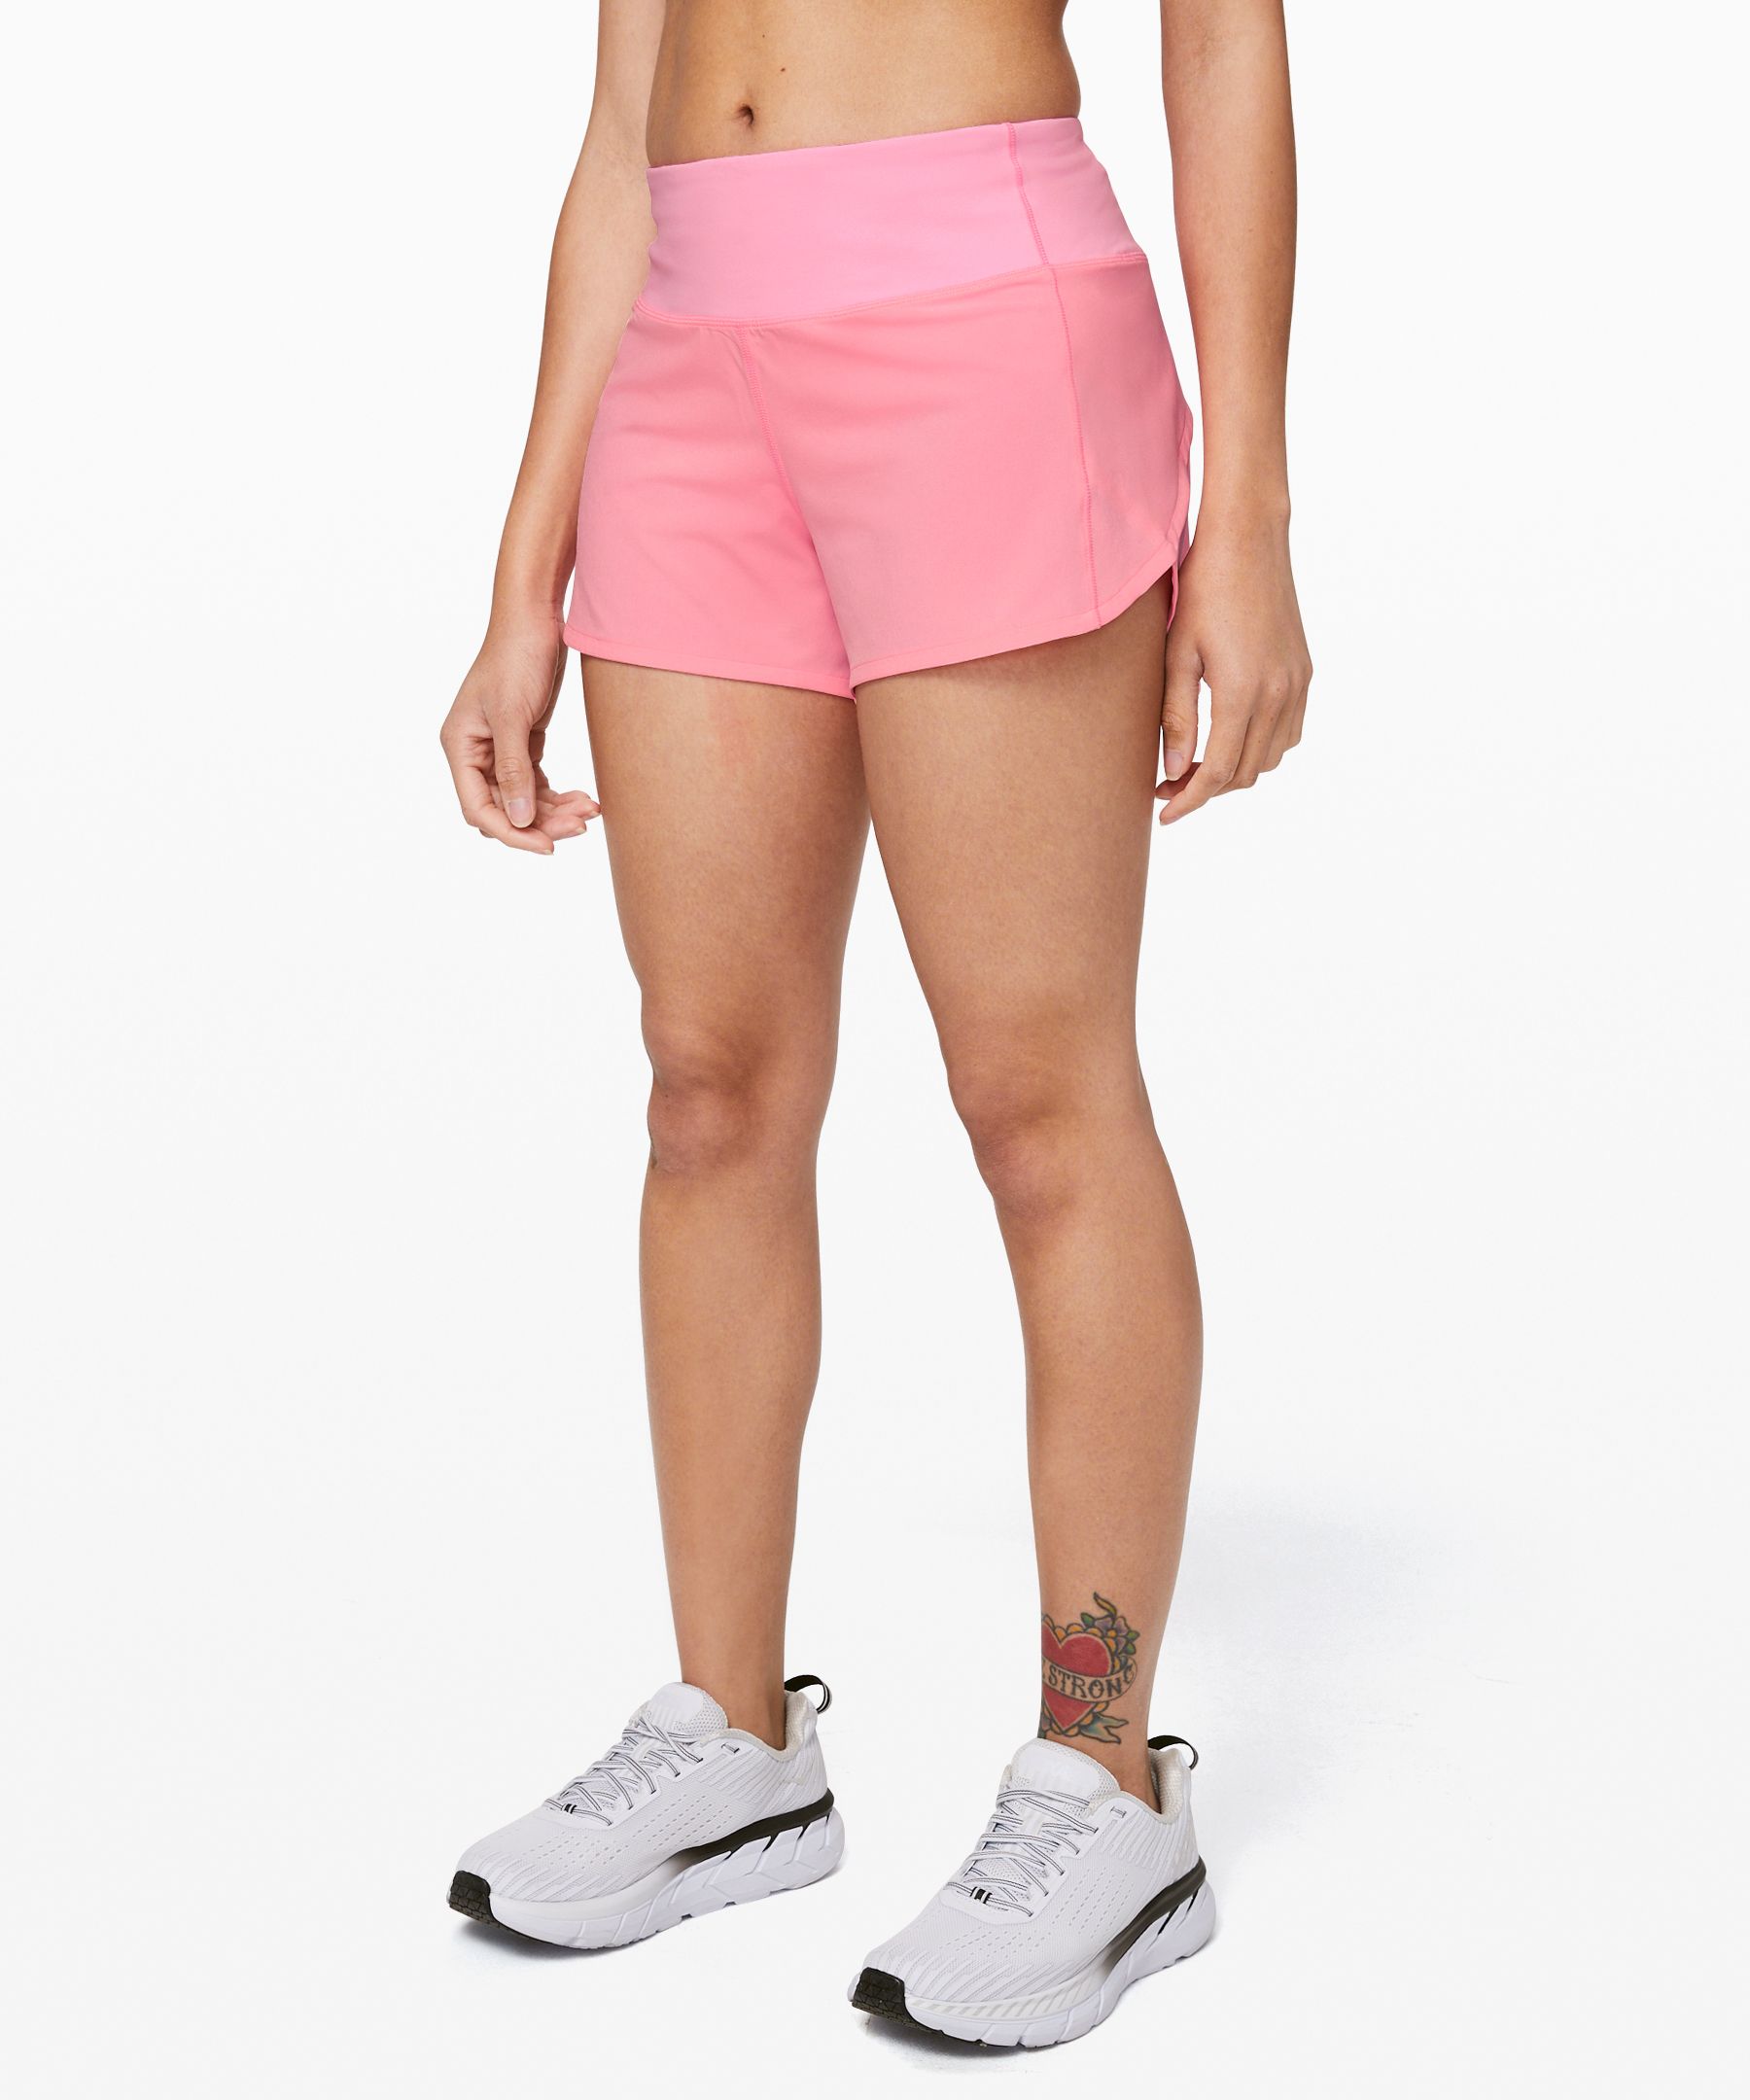 lululemon size 4,2.5 shorts in the color ripened raspberry